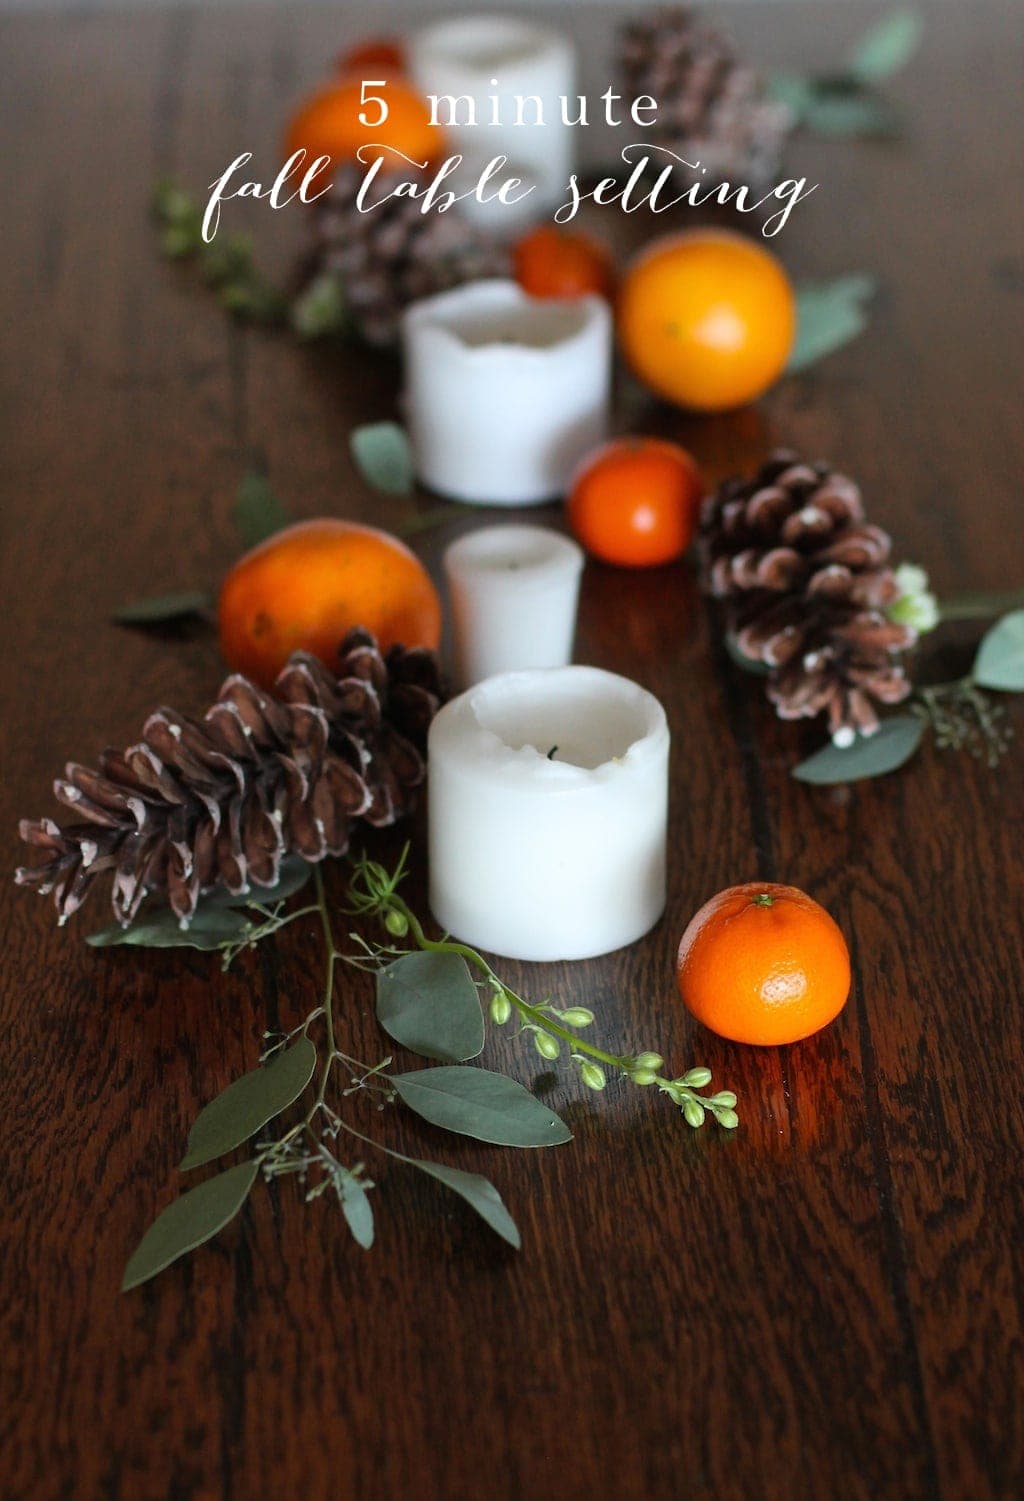 5 minute thanksgiving table setting - easy DIY centerpiece tutorial 